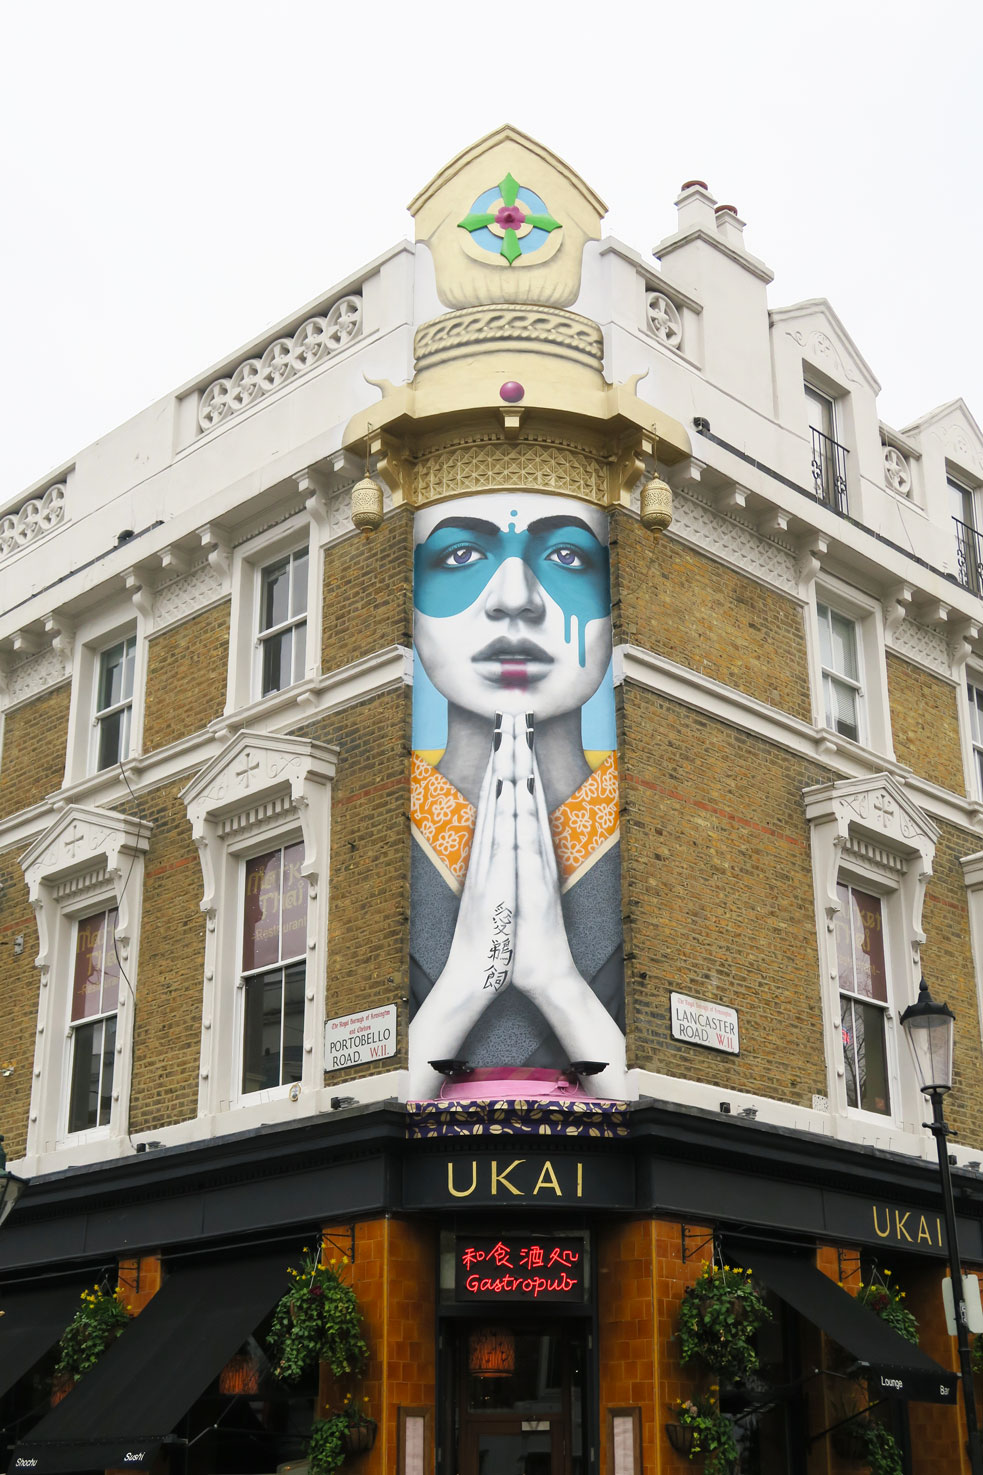 notting hill ukai shop with mural